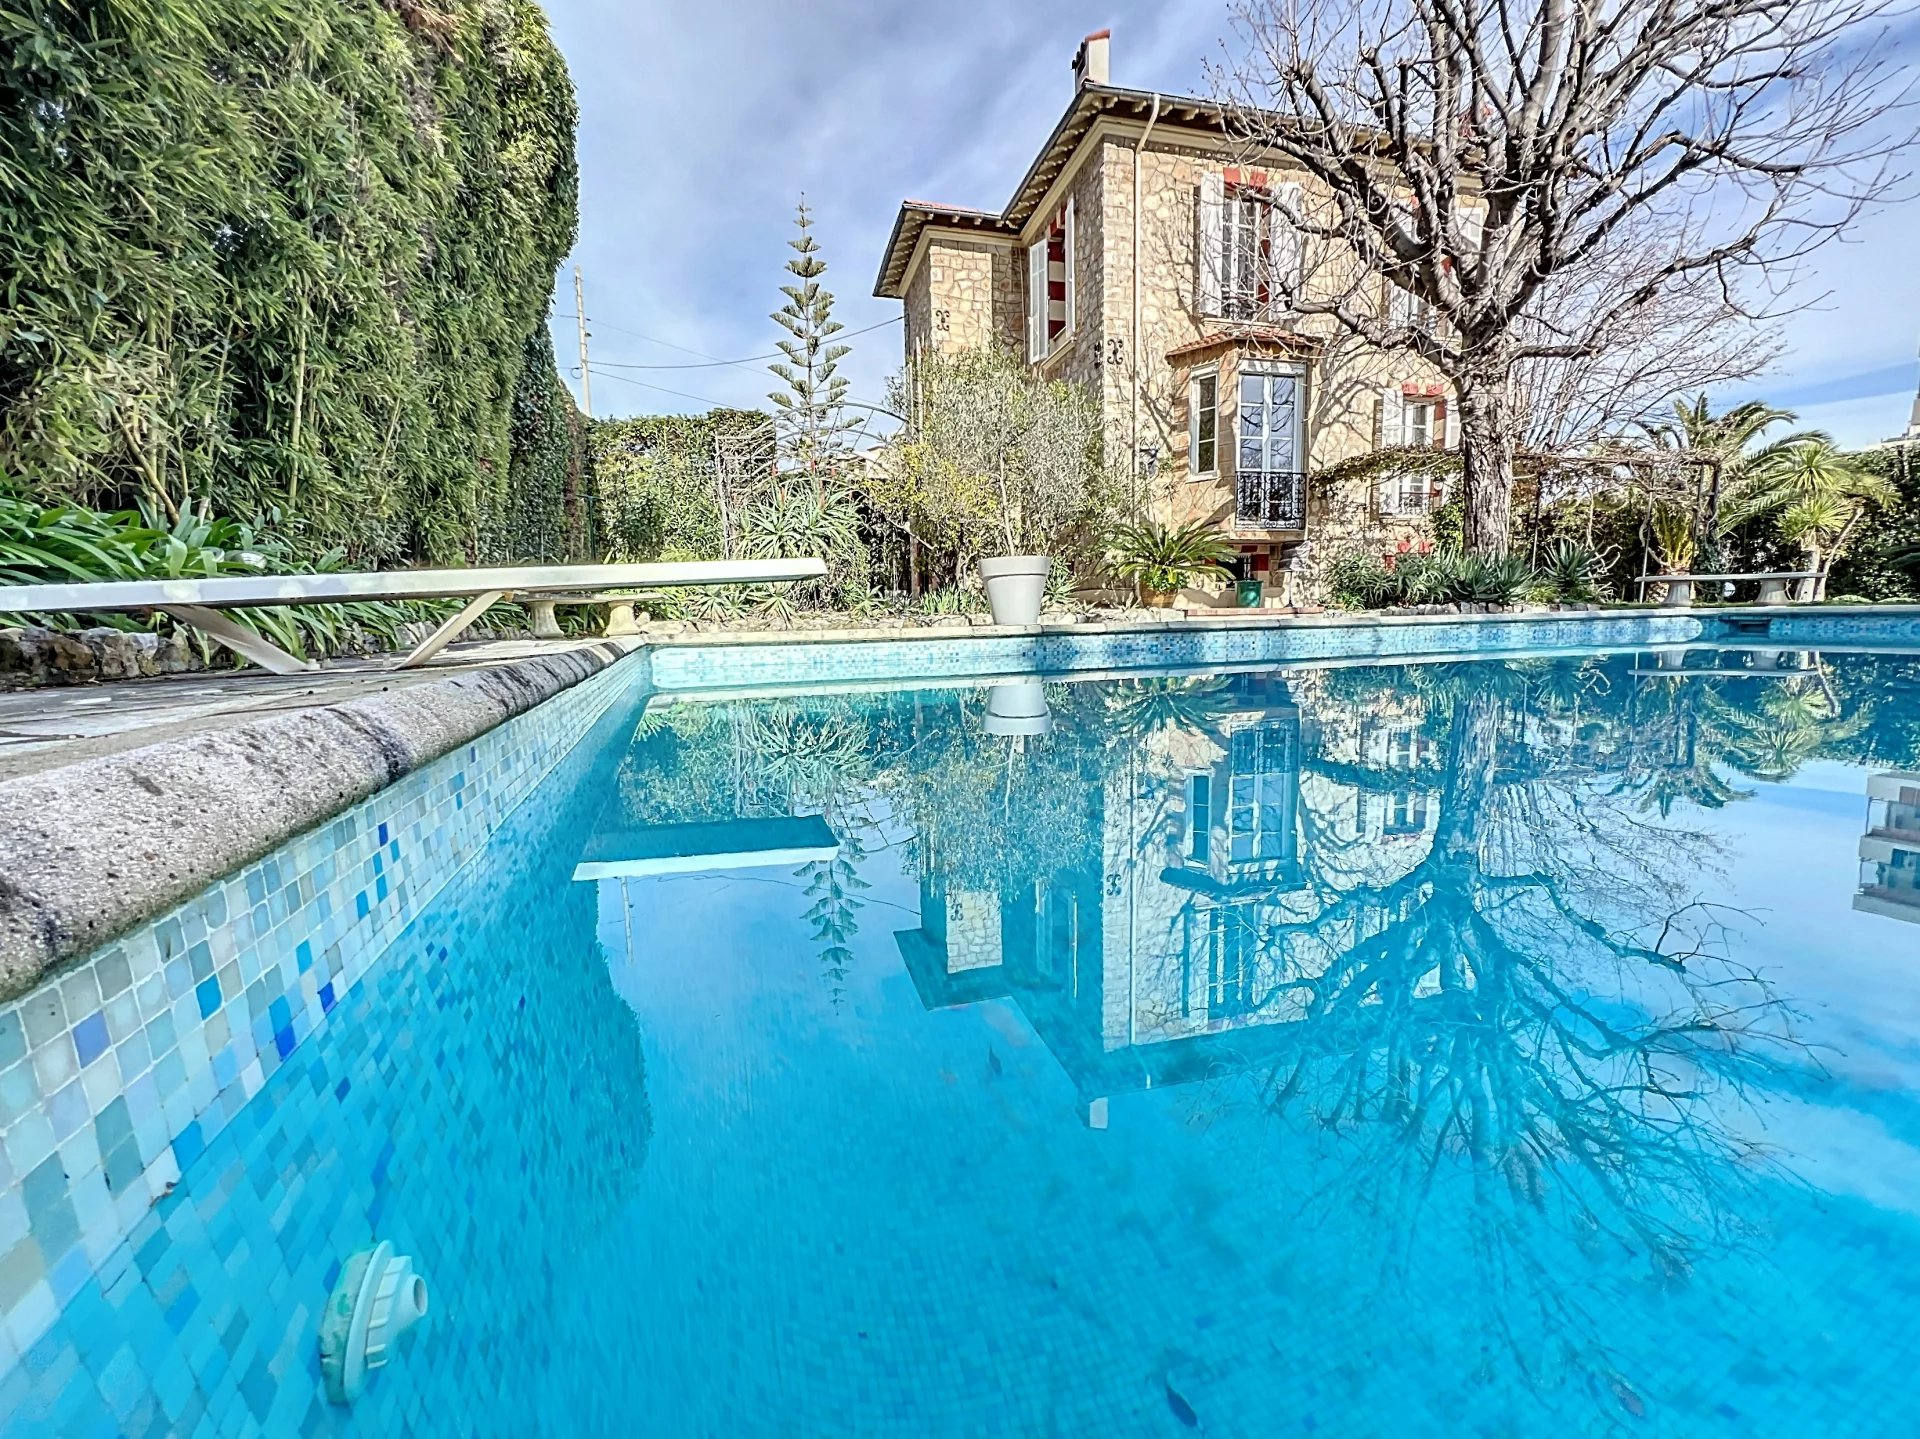 ANTIBES: BEAUTIFUL MIDDLE-CLASS VILLA NEAR THE TOWN CENTRE